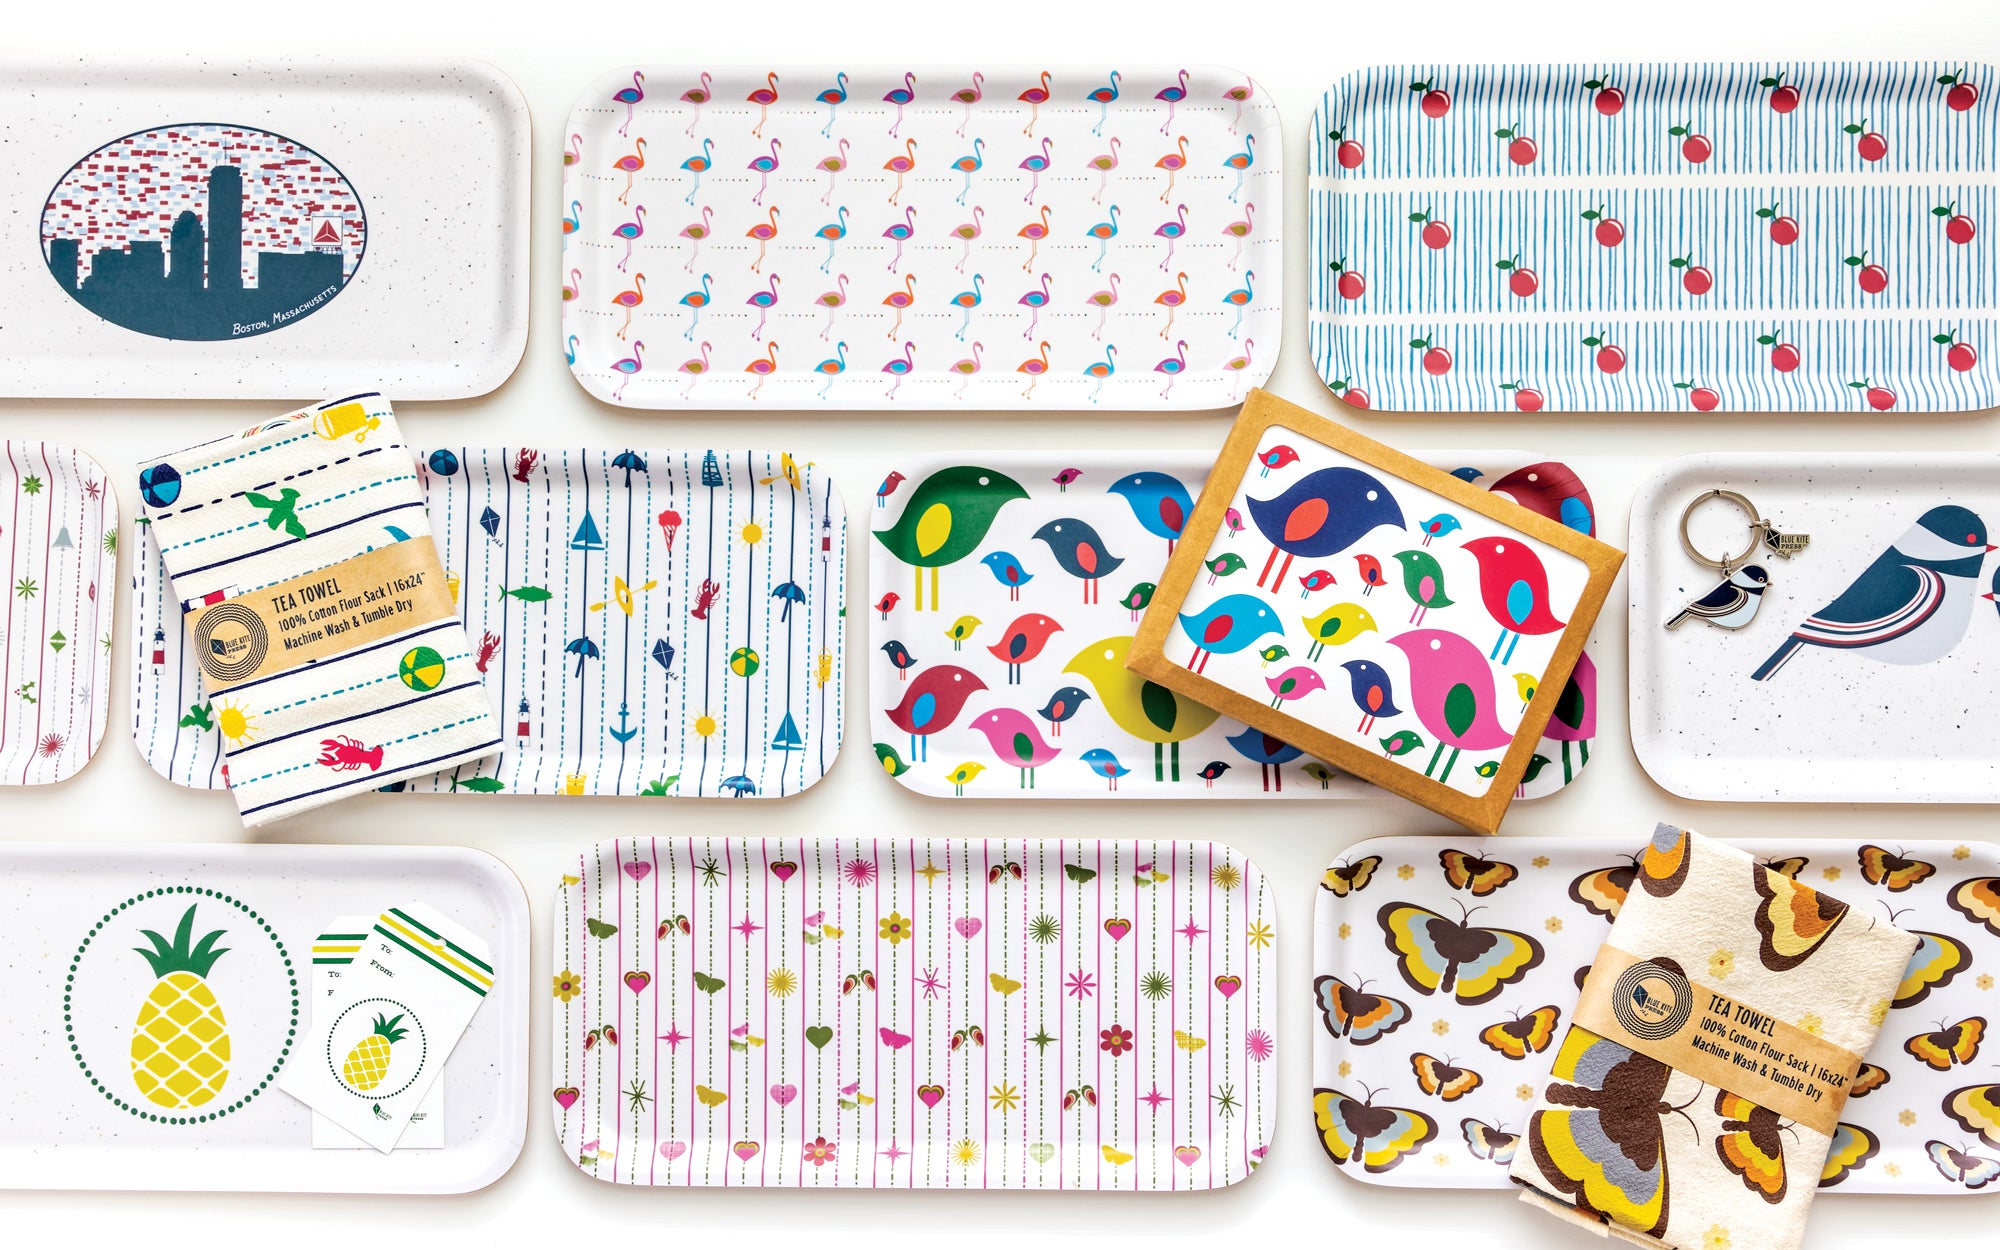 Tea towels, notecards and birch trays with colorful illustrations